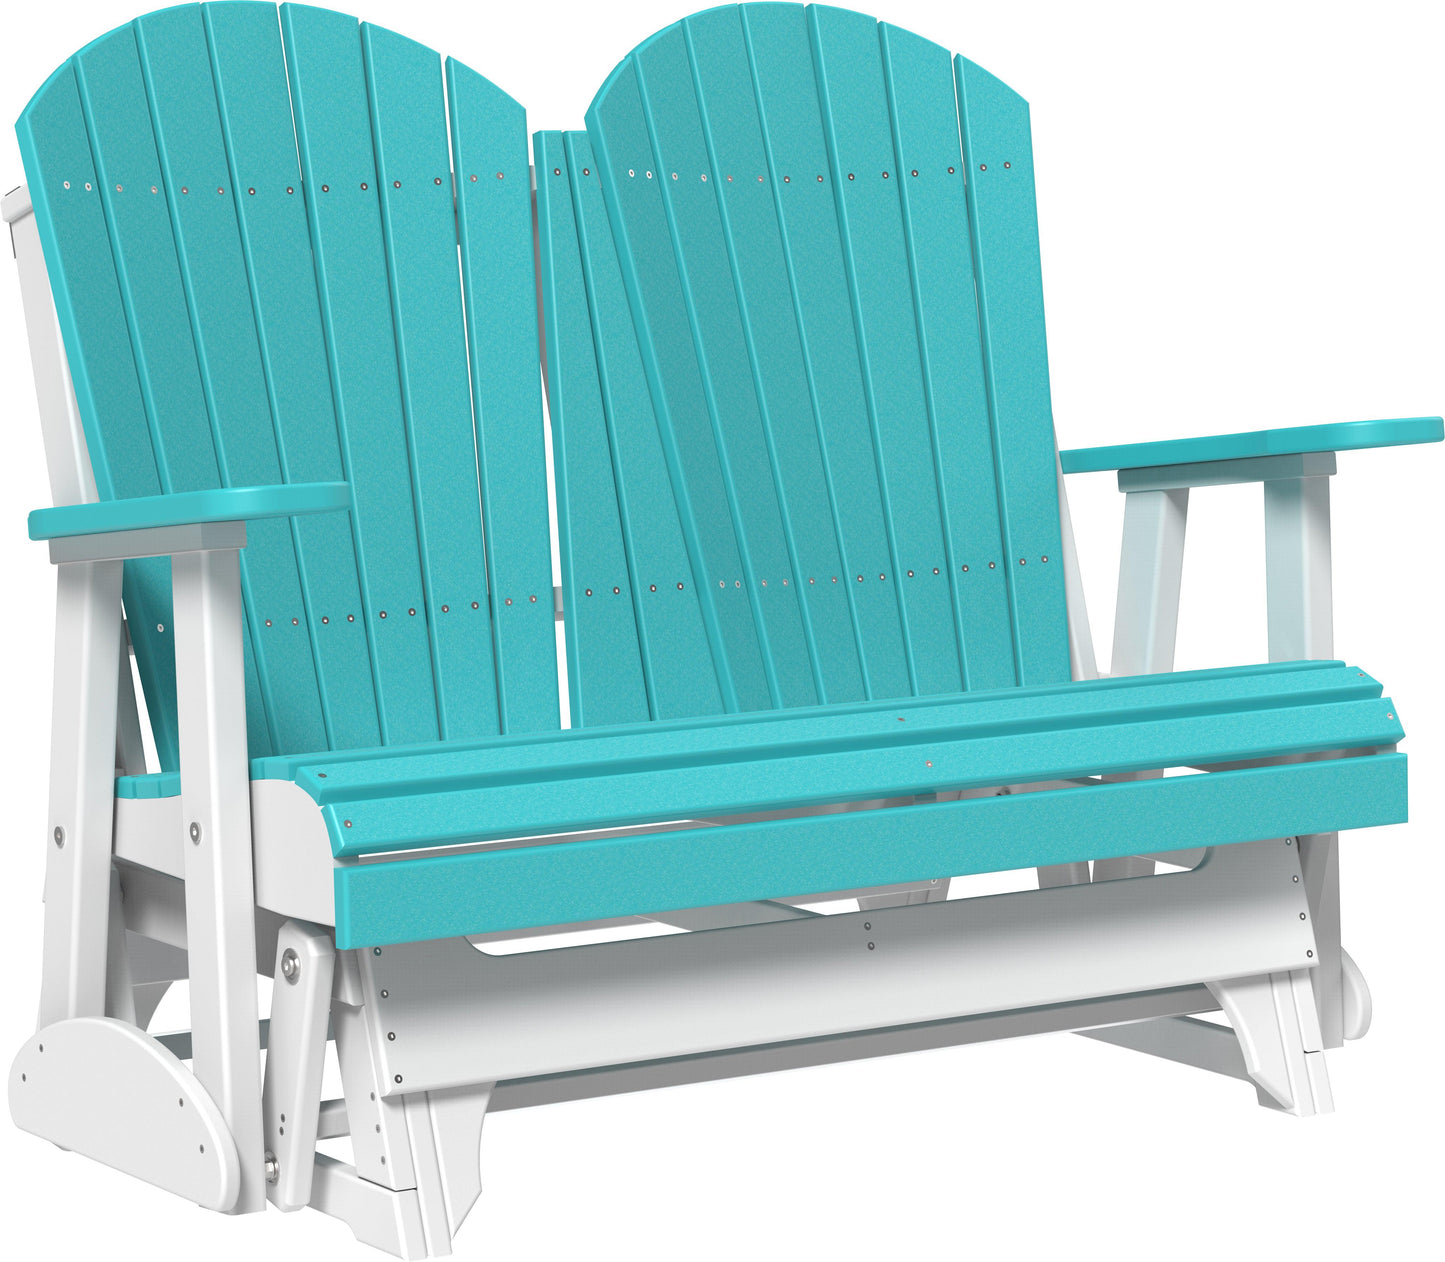 LuxCraft Recycled Plastic 4' Adirondack Glider Chair  - LEAD TIME TO SHIP 10 to 12 BUSINESS DAYS